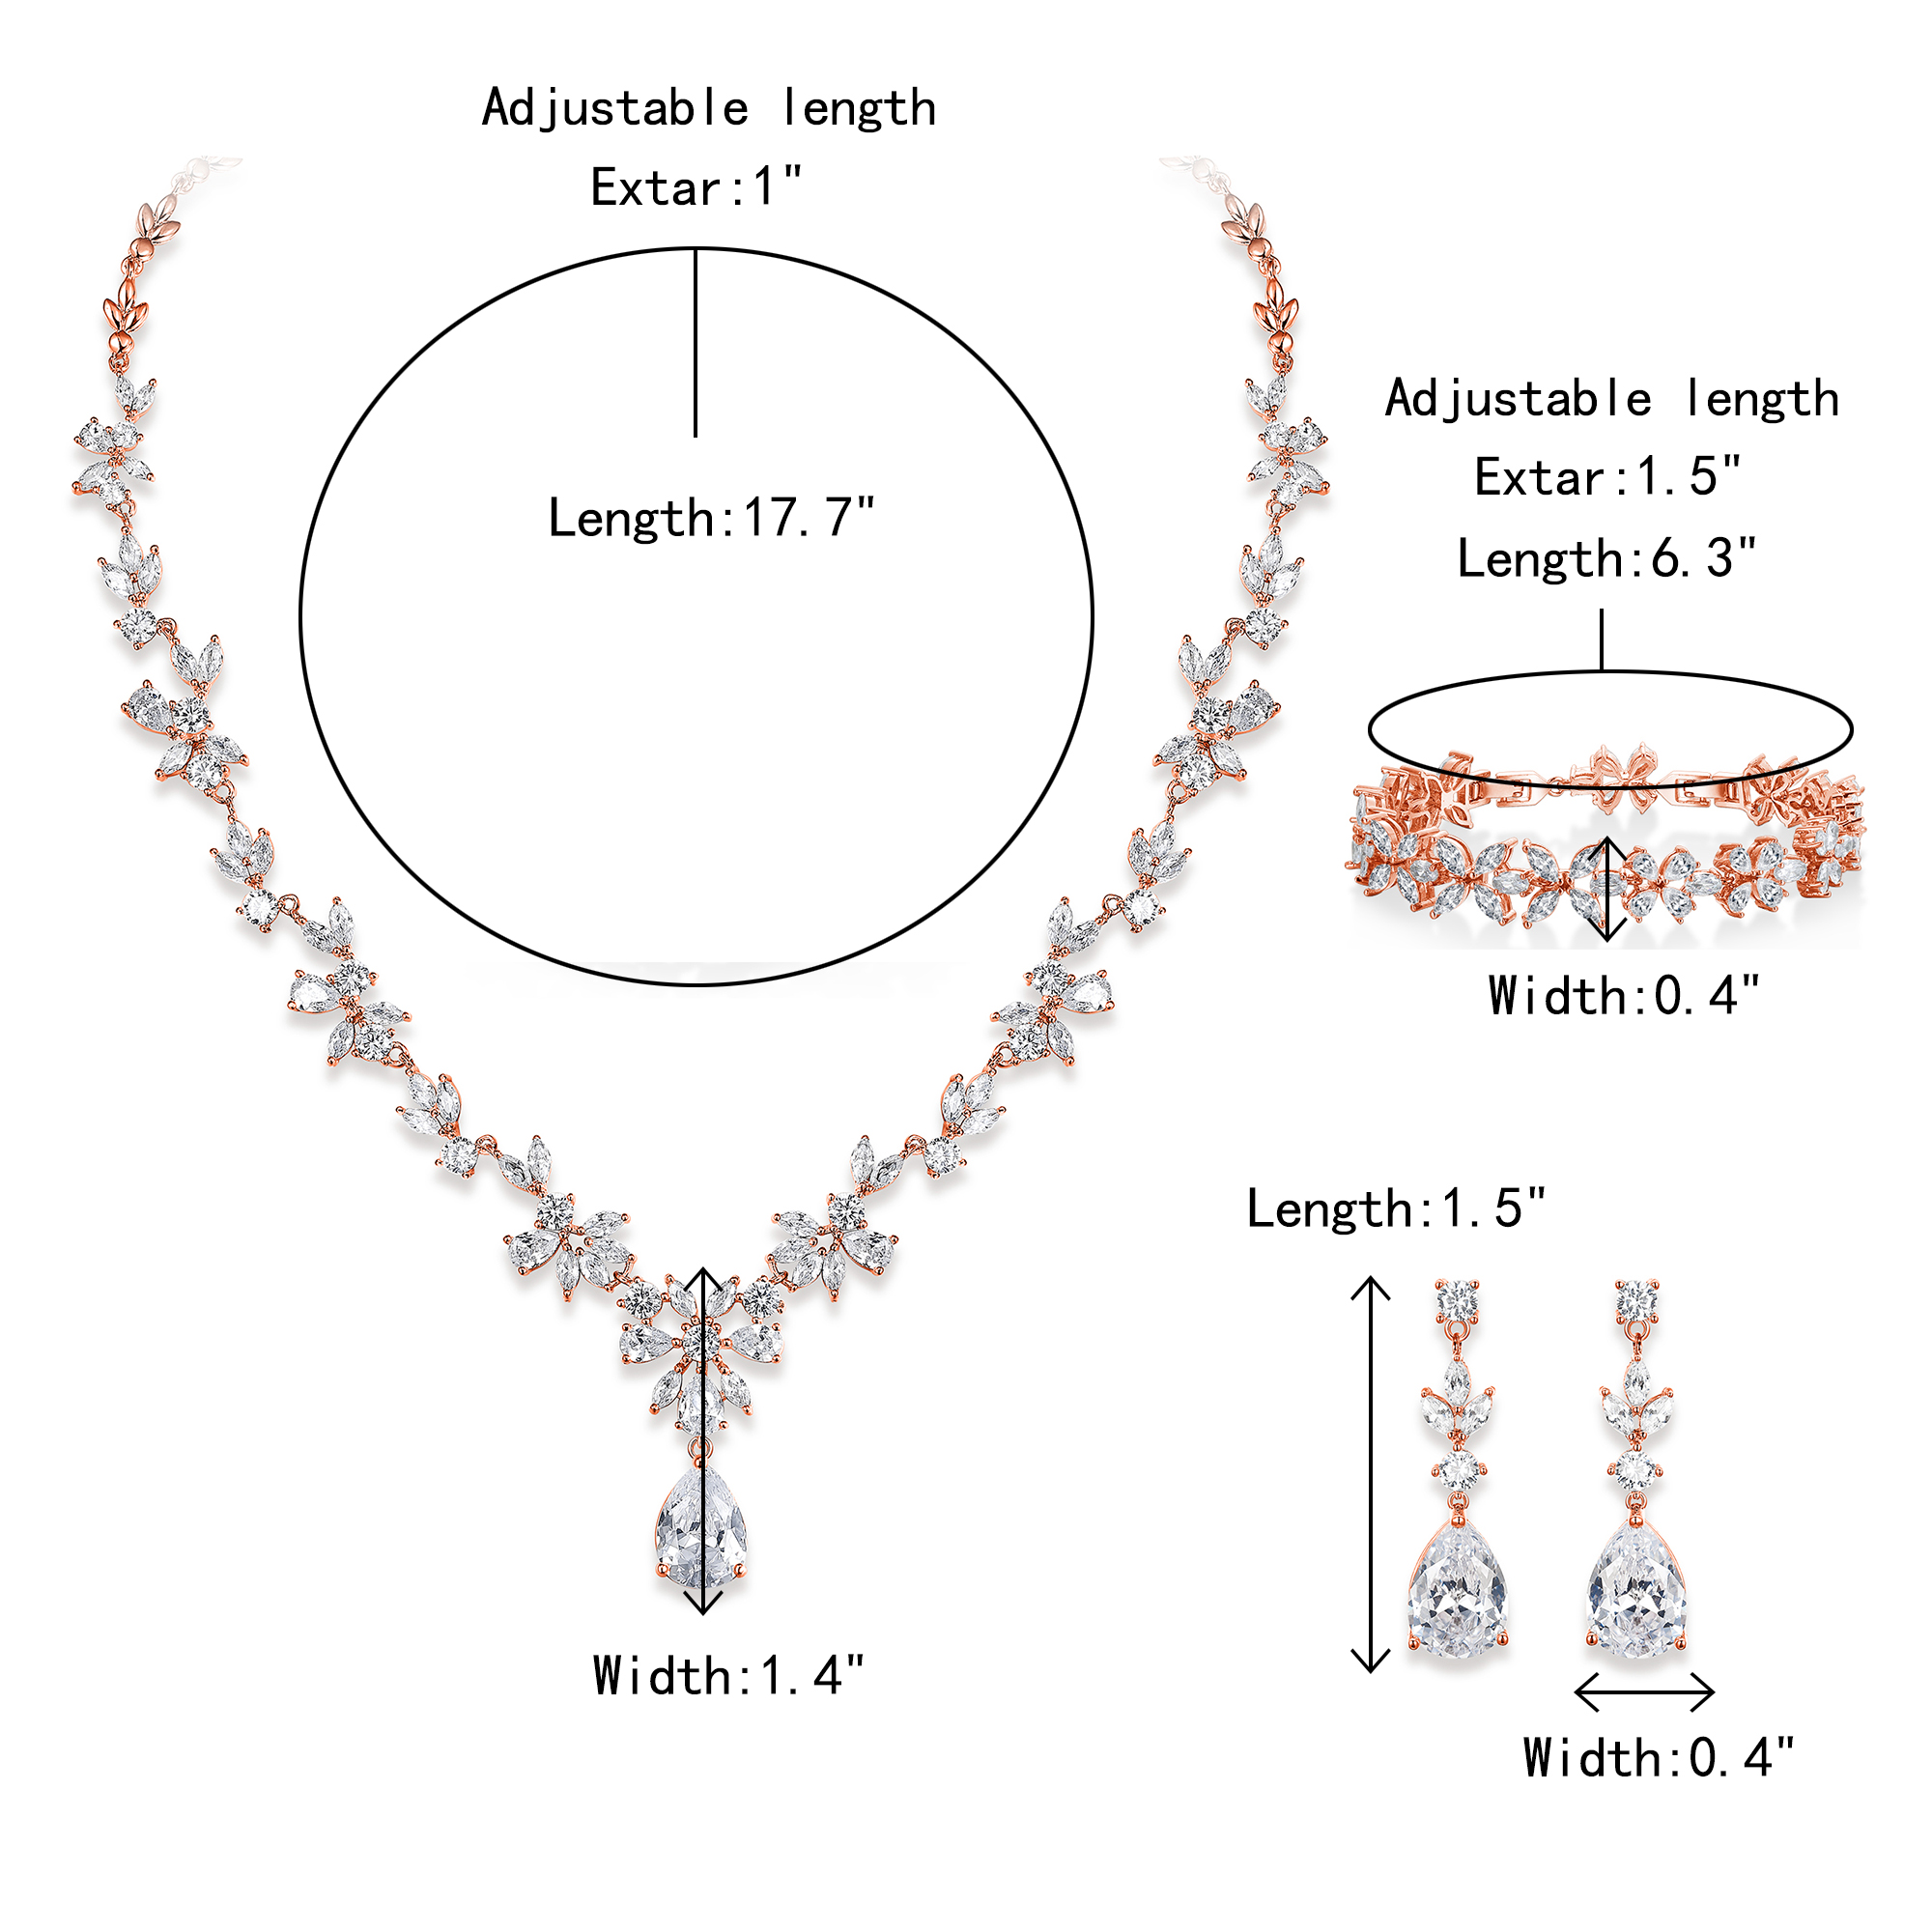 Wedure Bridal Jewelry Set for Bride Bridesmaid, Rose Gold Plated Flower Leaf White Cubic Zirconia Necklace Earrings Bracelet Set for Wedding Party - image 5 of 5